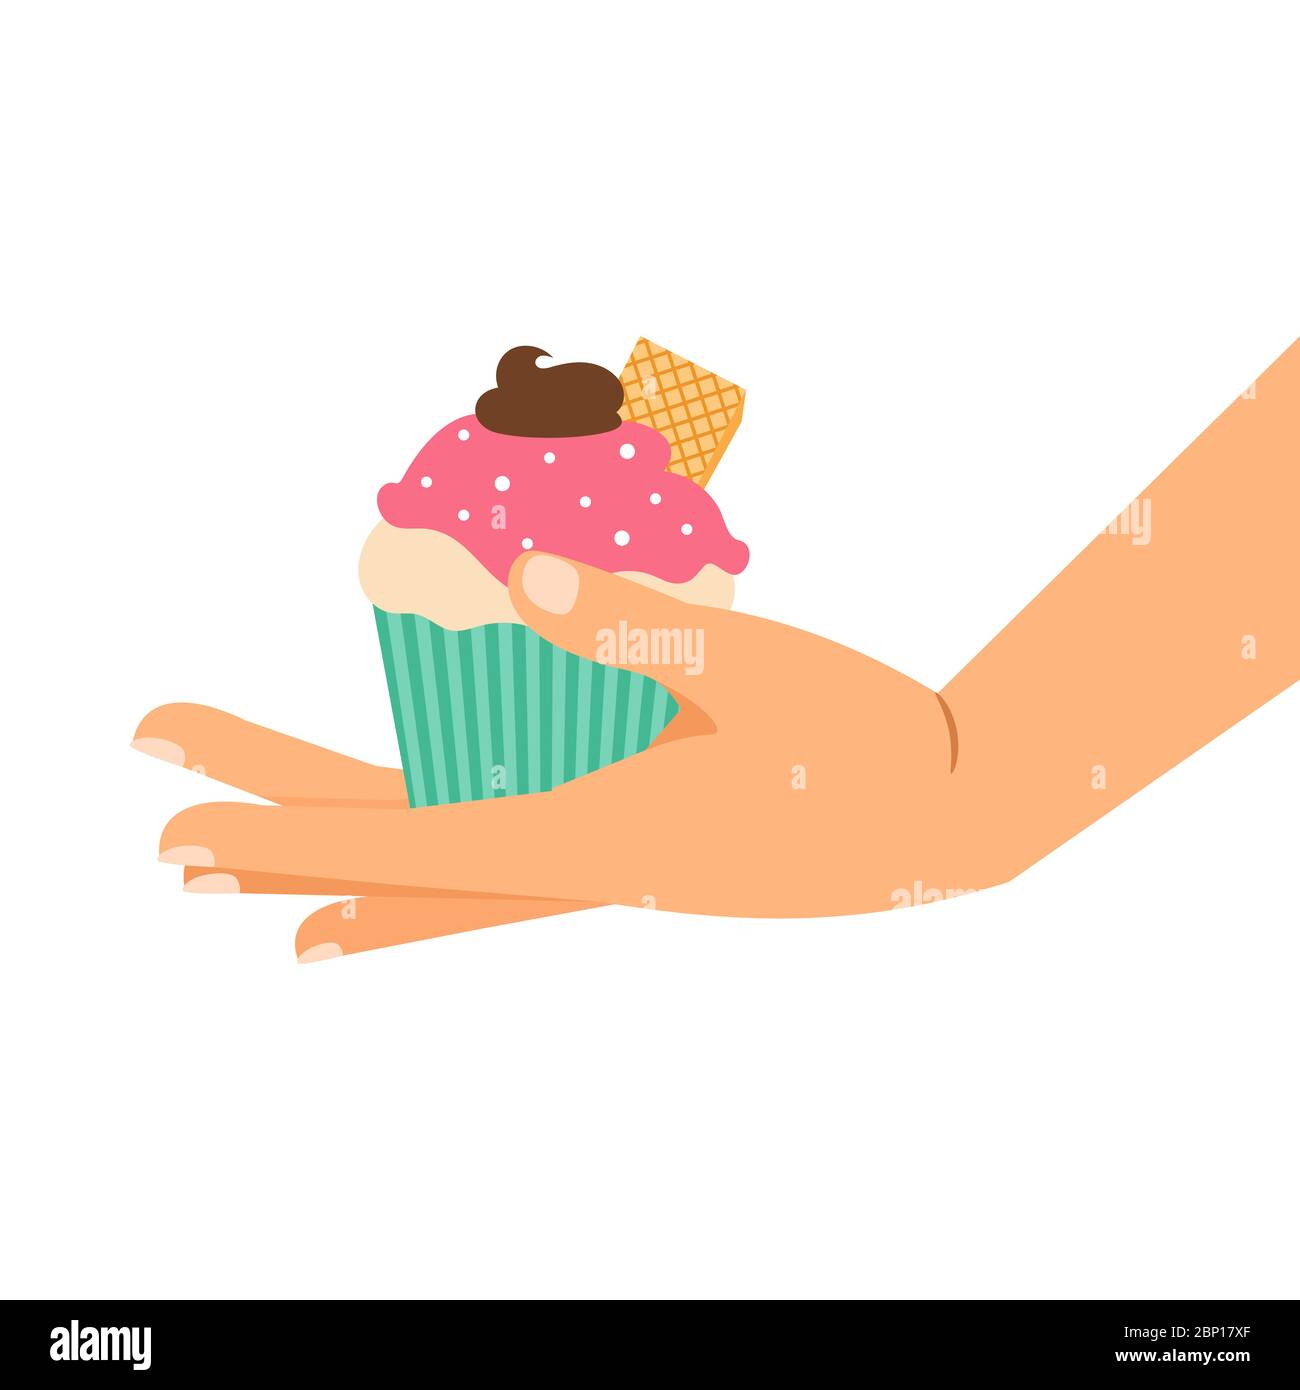 Cupcake with wafer and chocolate cream. Hand holding cupcake, isolated vector illustration Stock Vector